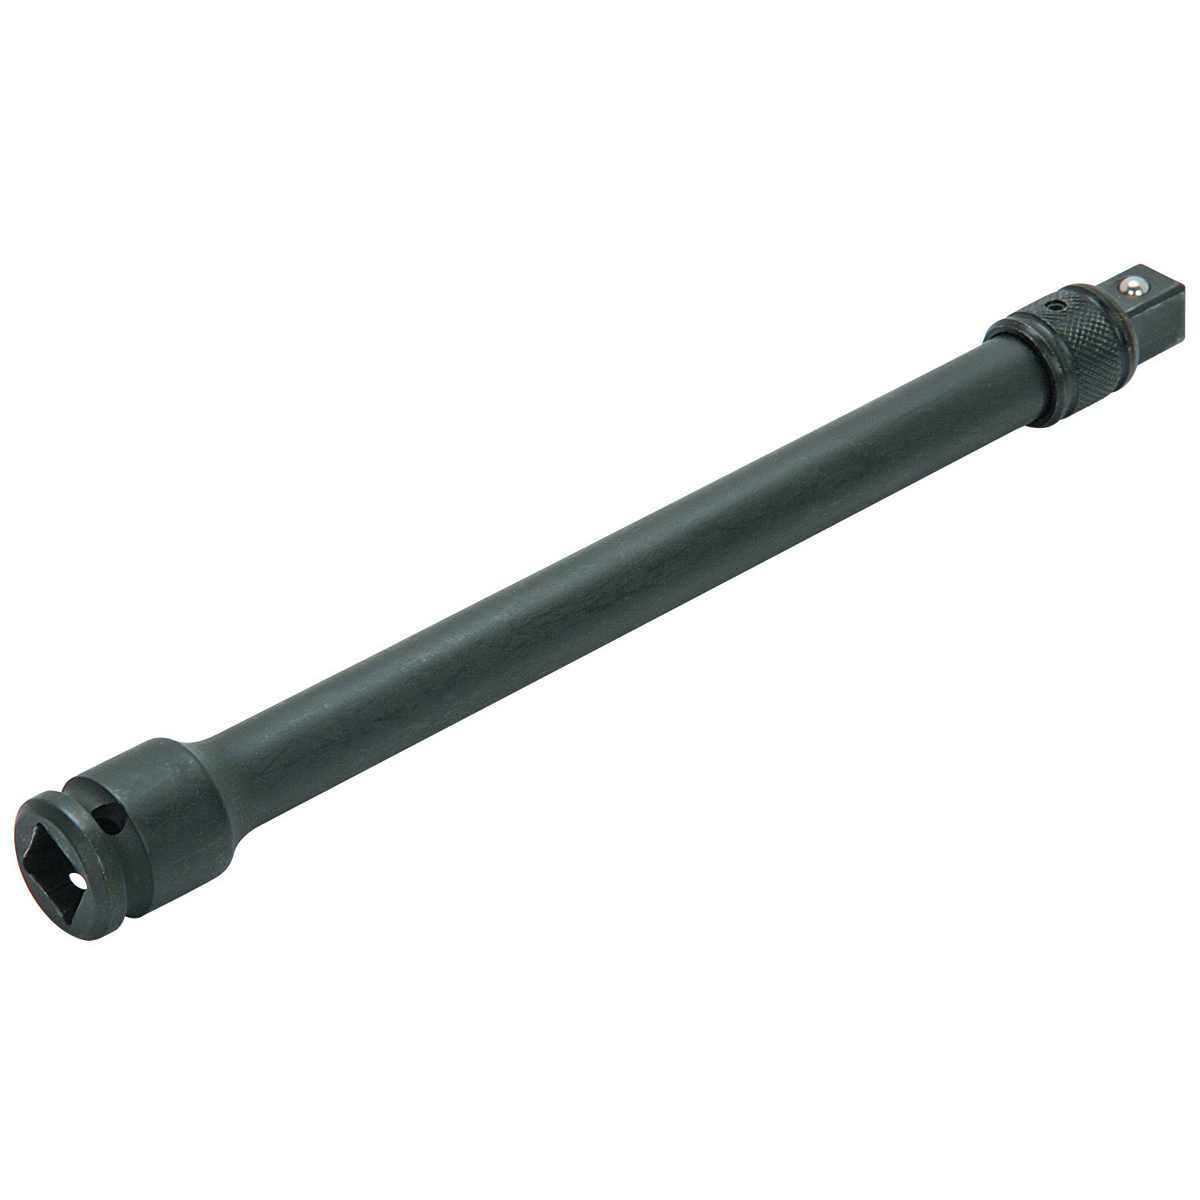 PITTSBURGH 1/2 in. Quick Release Impact Extension Bar - Item 98208